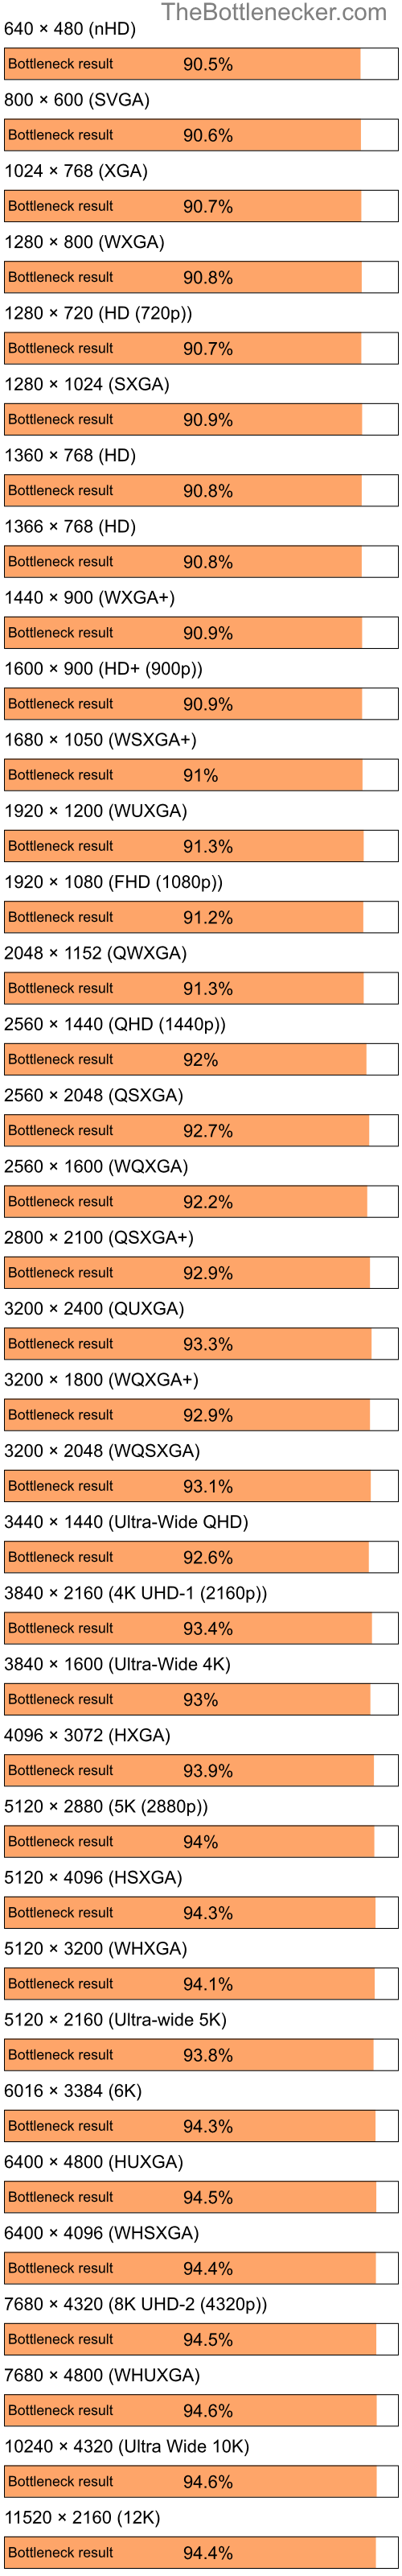 Bottleneck results by resolution for Intel Pentium 4 and NVIDIA GeForce4 MX 420 in7 Days to Die